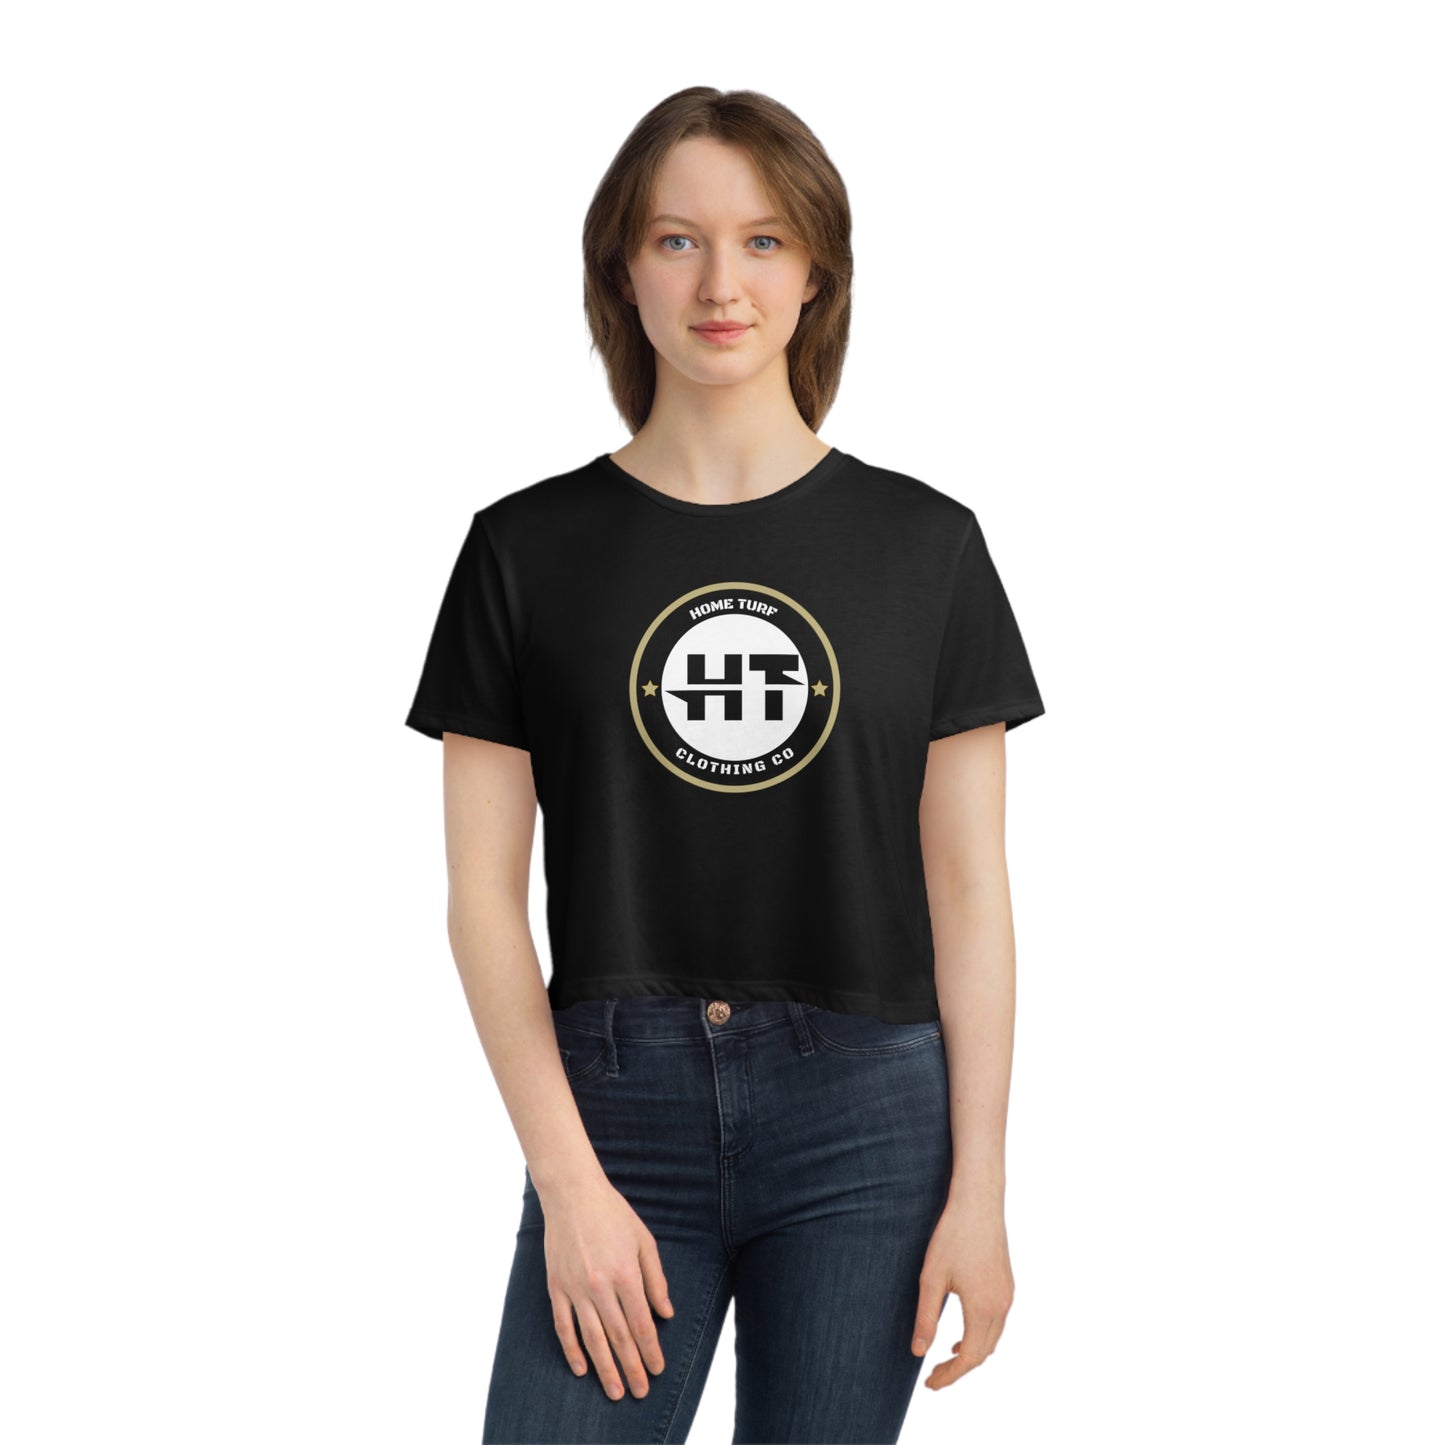 Women's Flowy Cropped Home Turf Graphic Tee